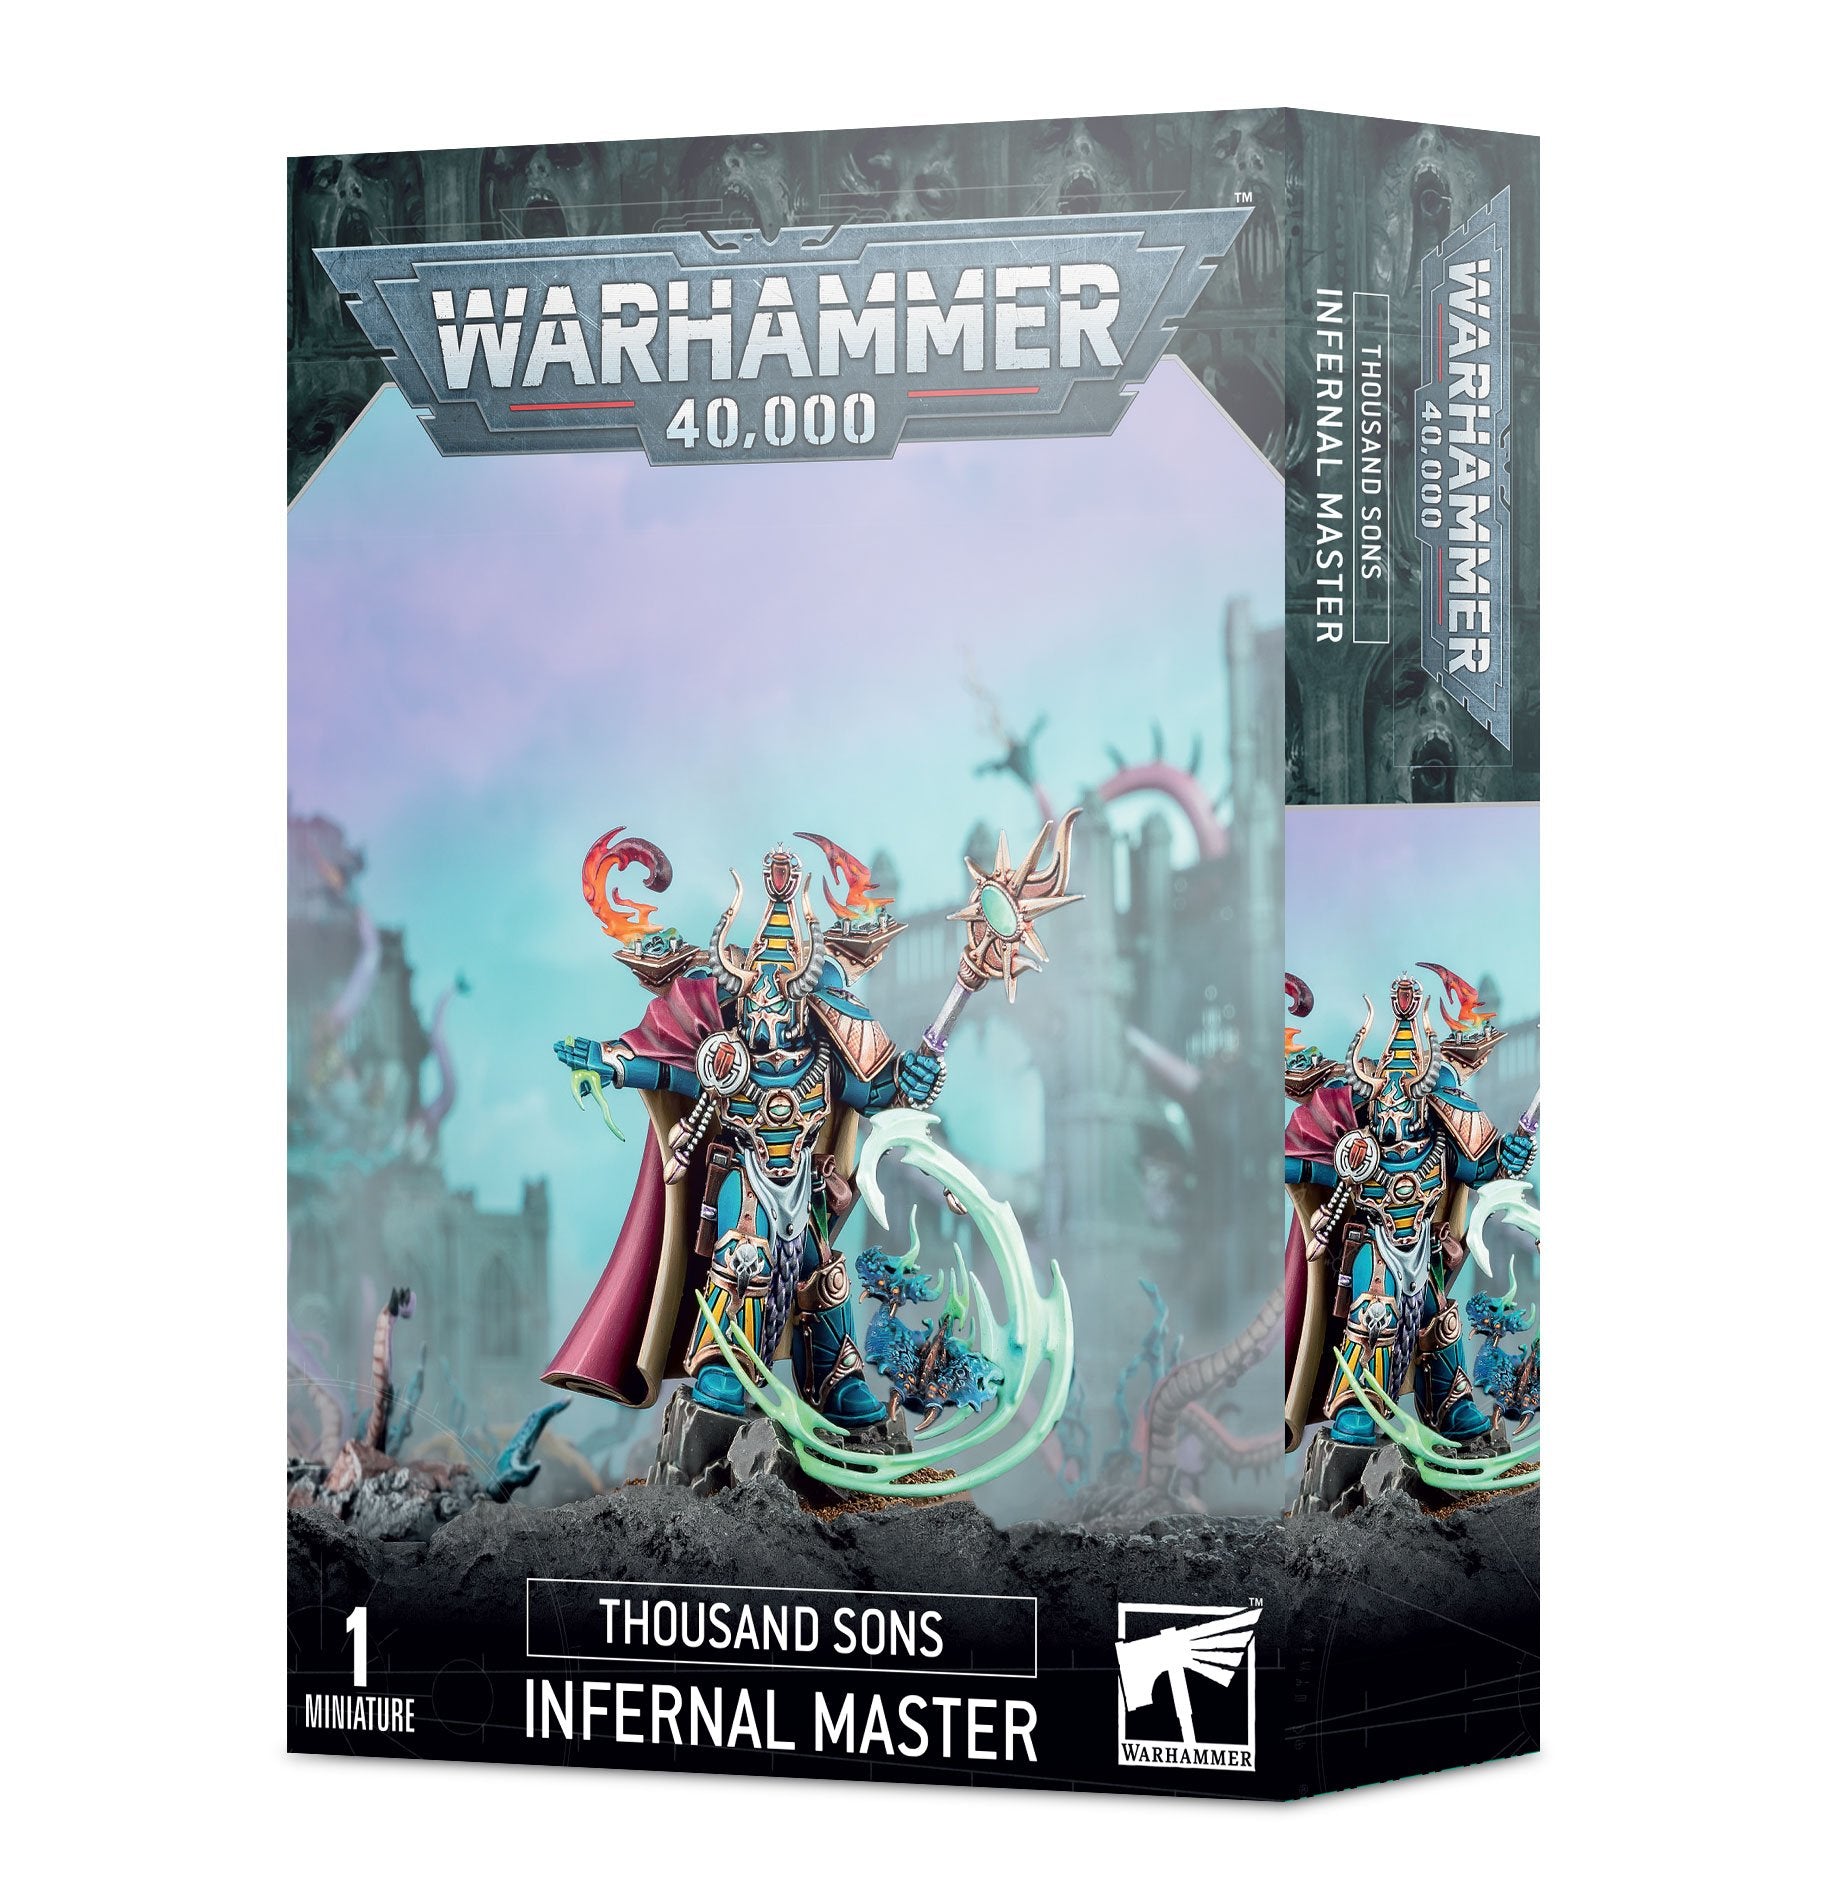 THOUSAND SONS: INFERNAL MASTER | BD Cosmos